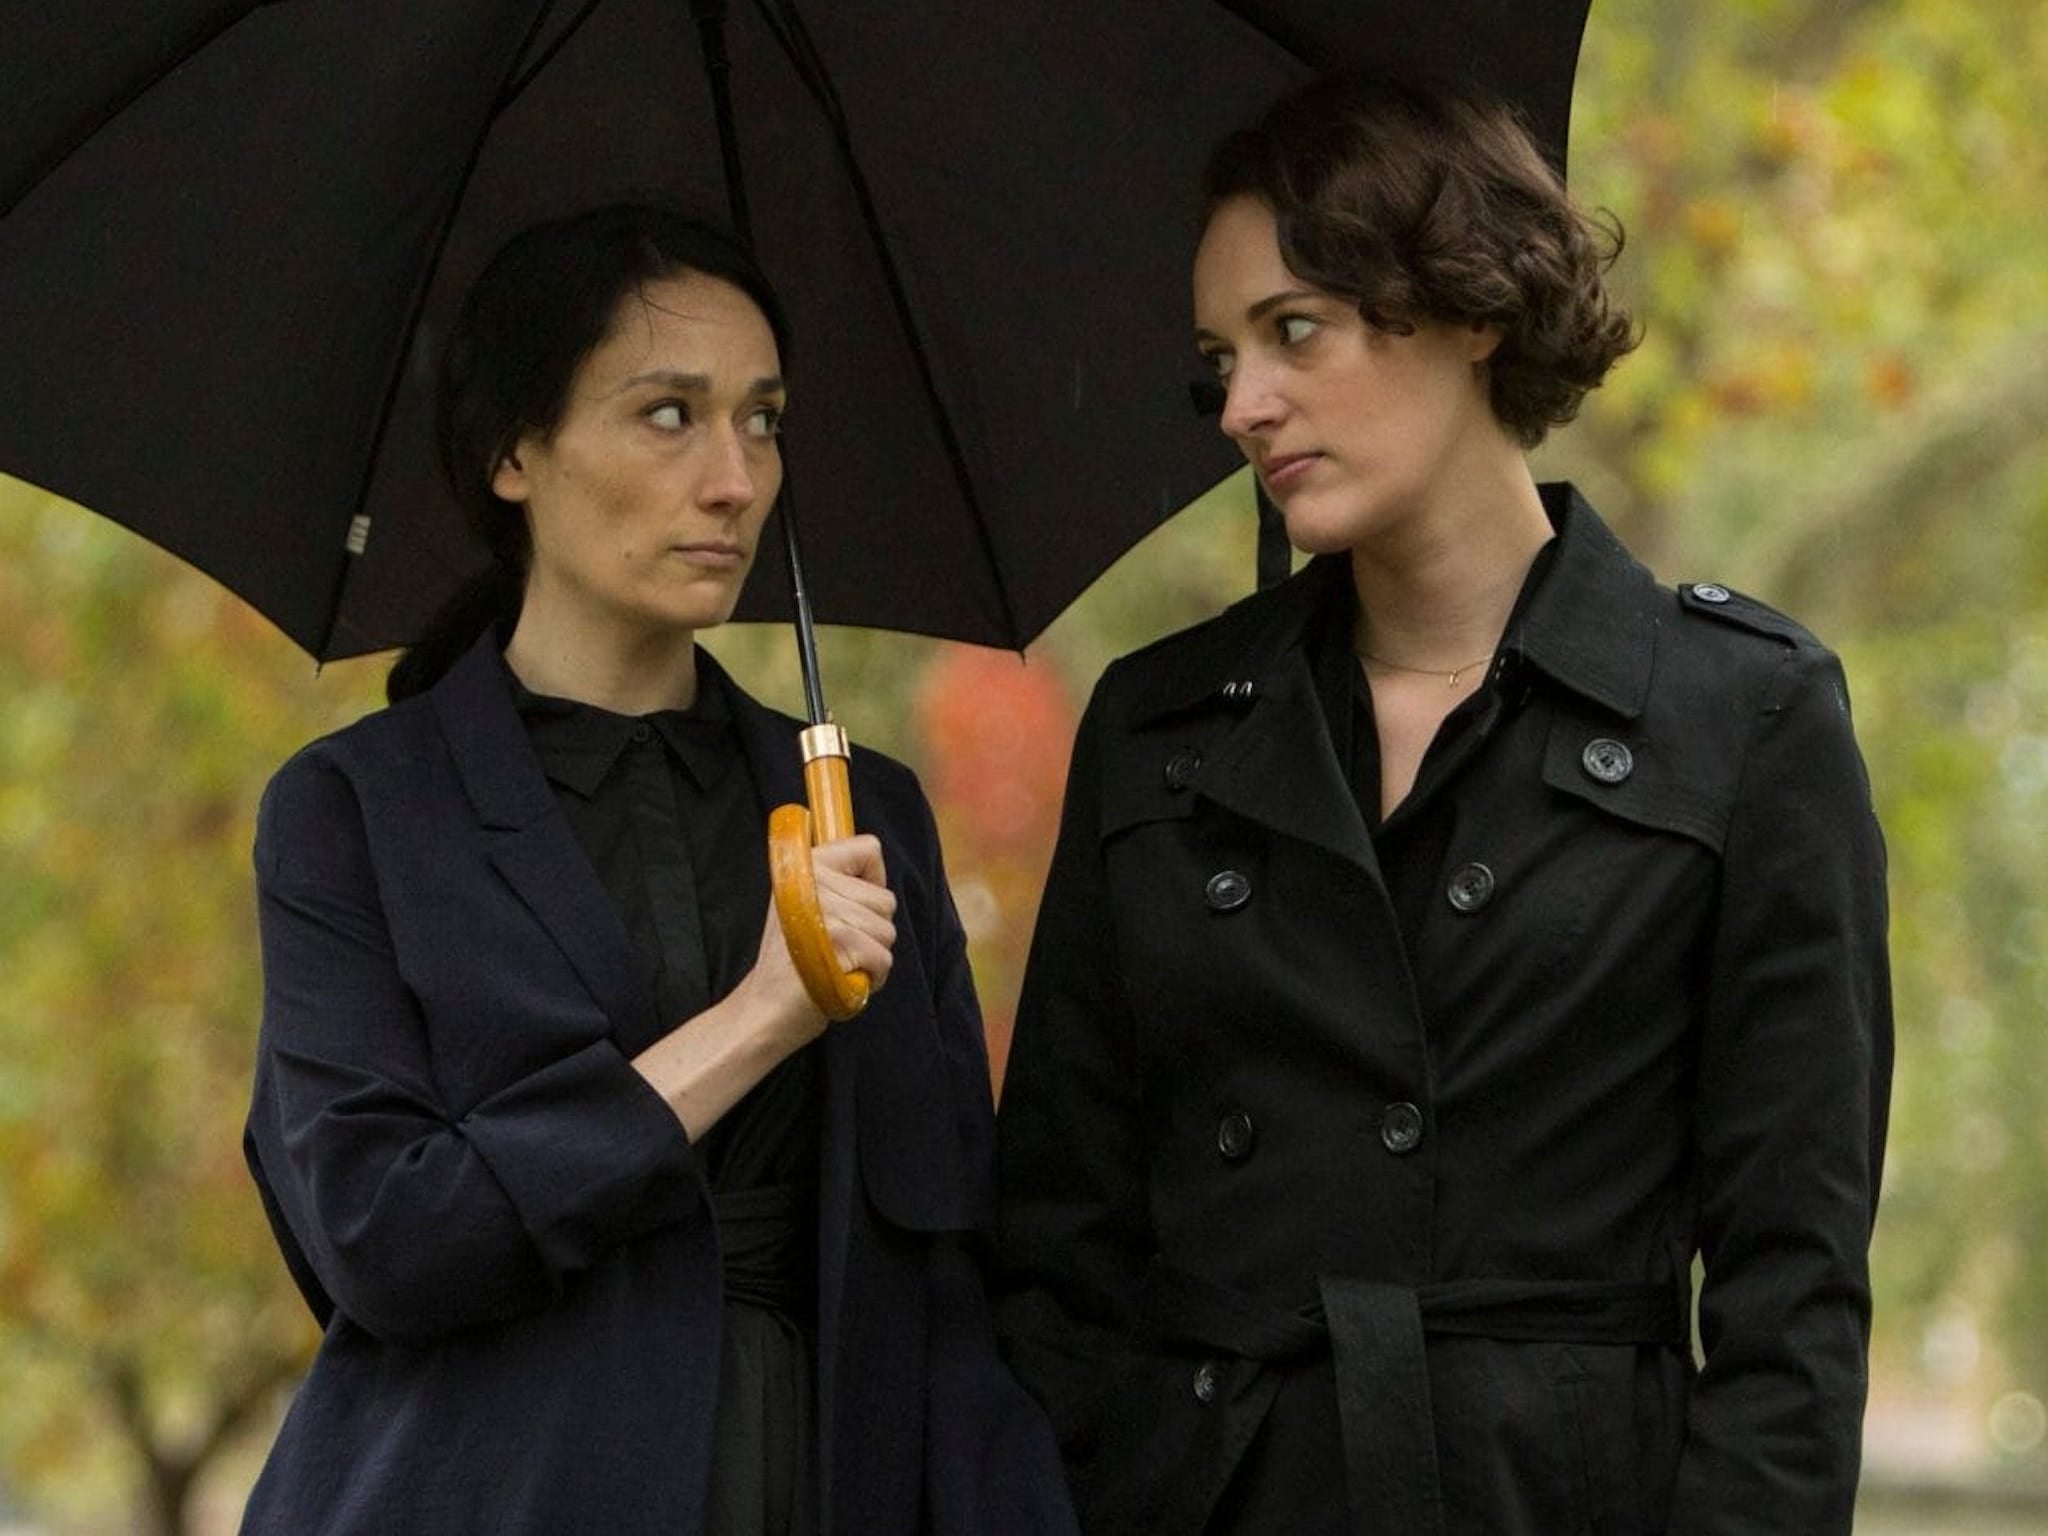 Sian Clifford and Phoebe Waller-Bridge in ‘Fleabag’, a BBC and Amazon Studios co-production